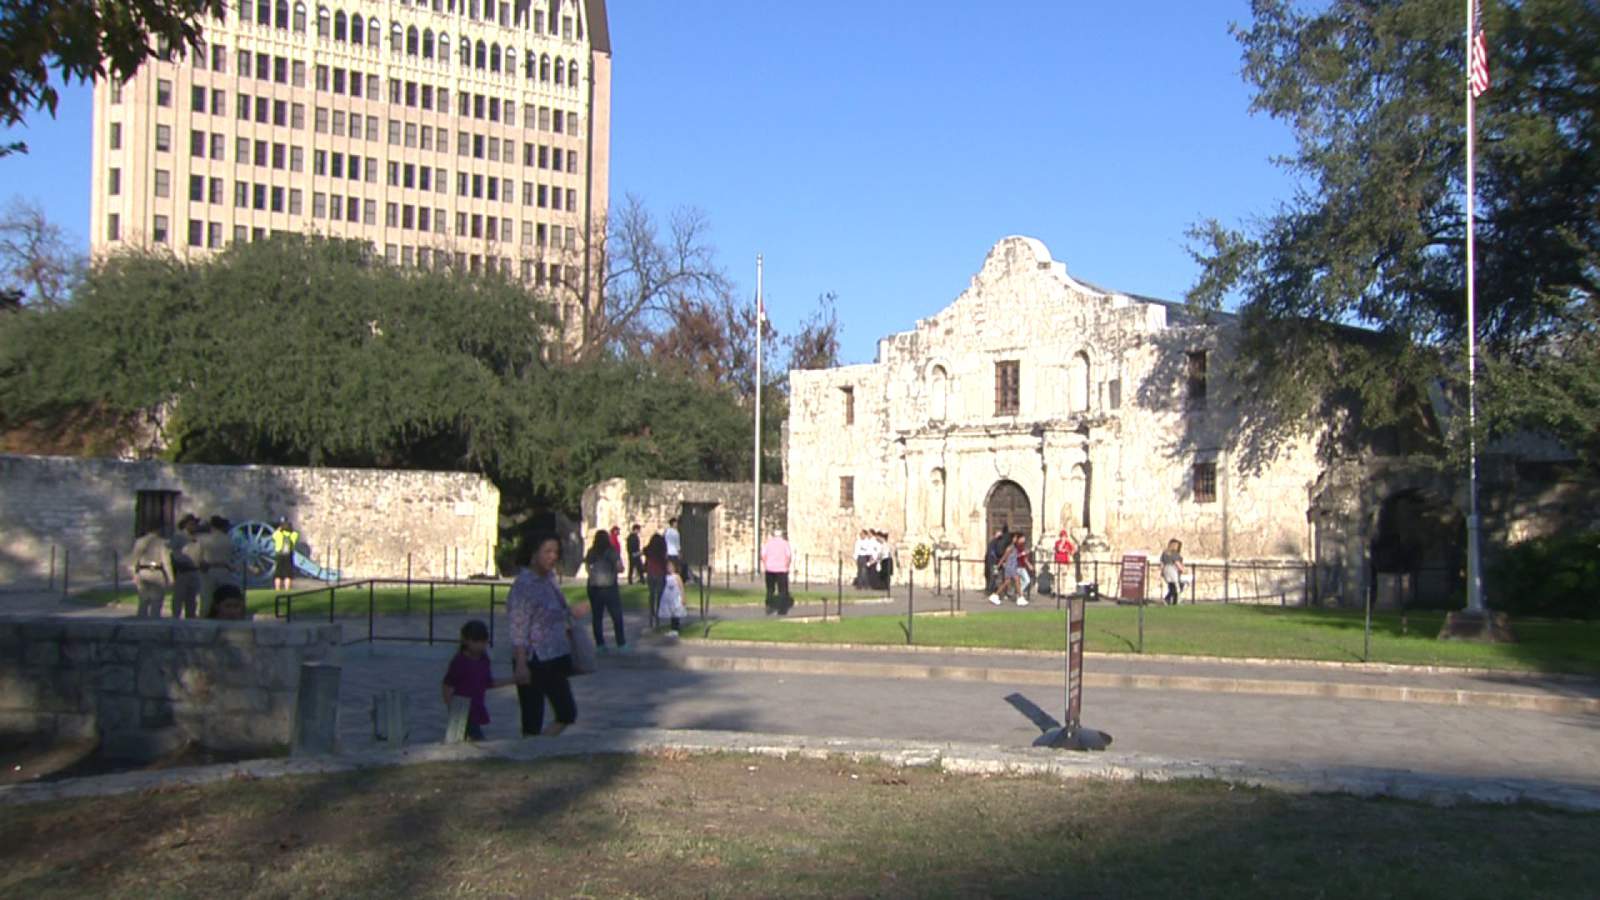 What happens now that remains of three bodies have been found at the Alamo?